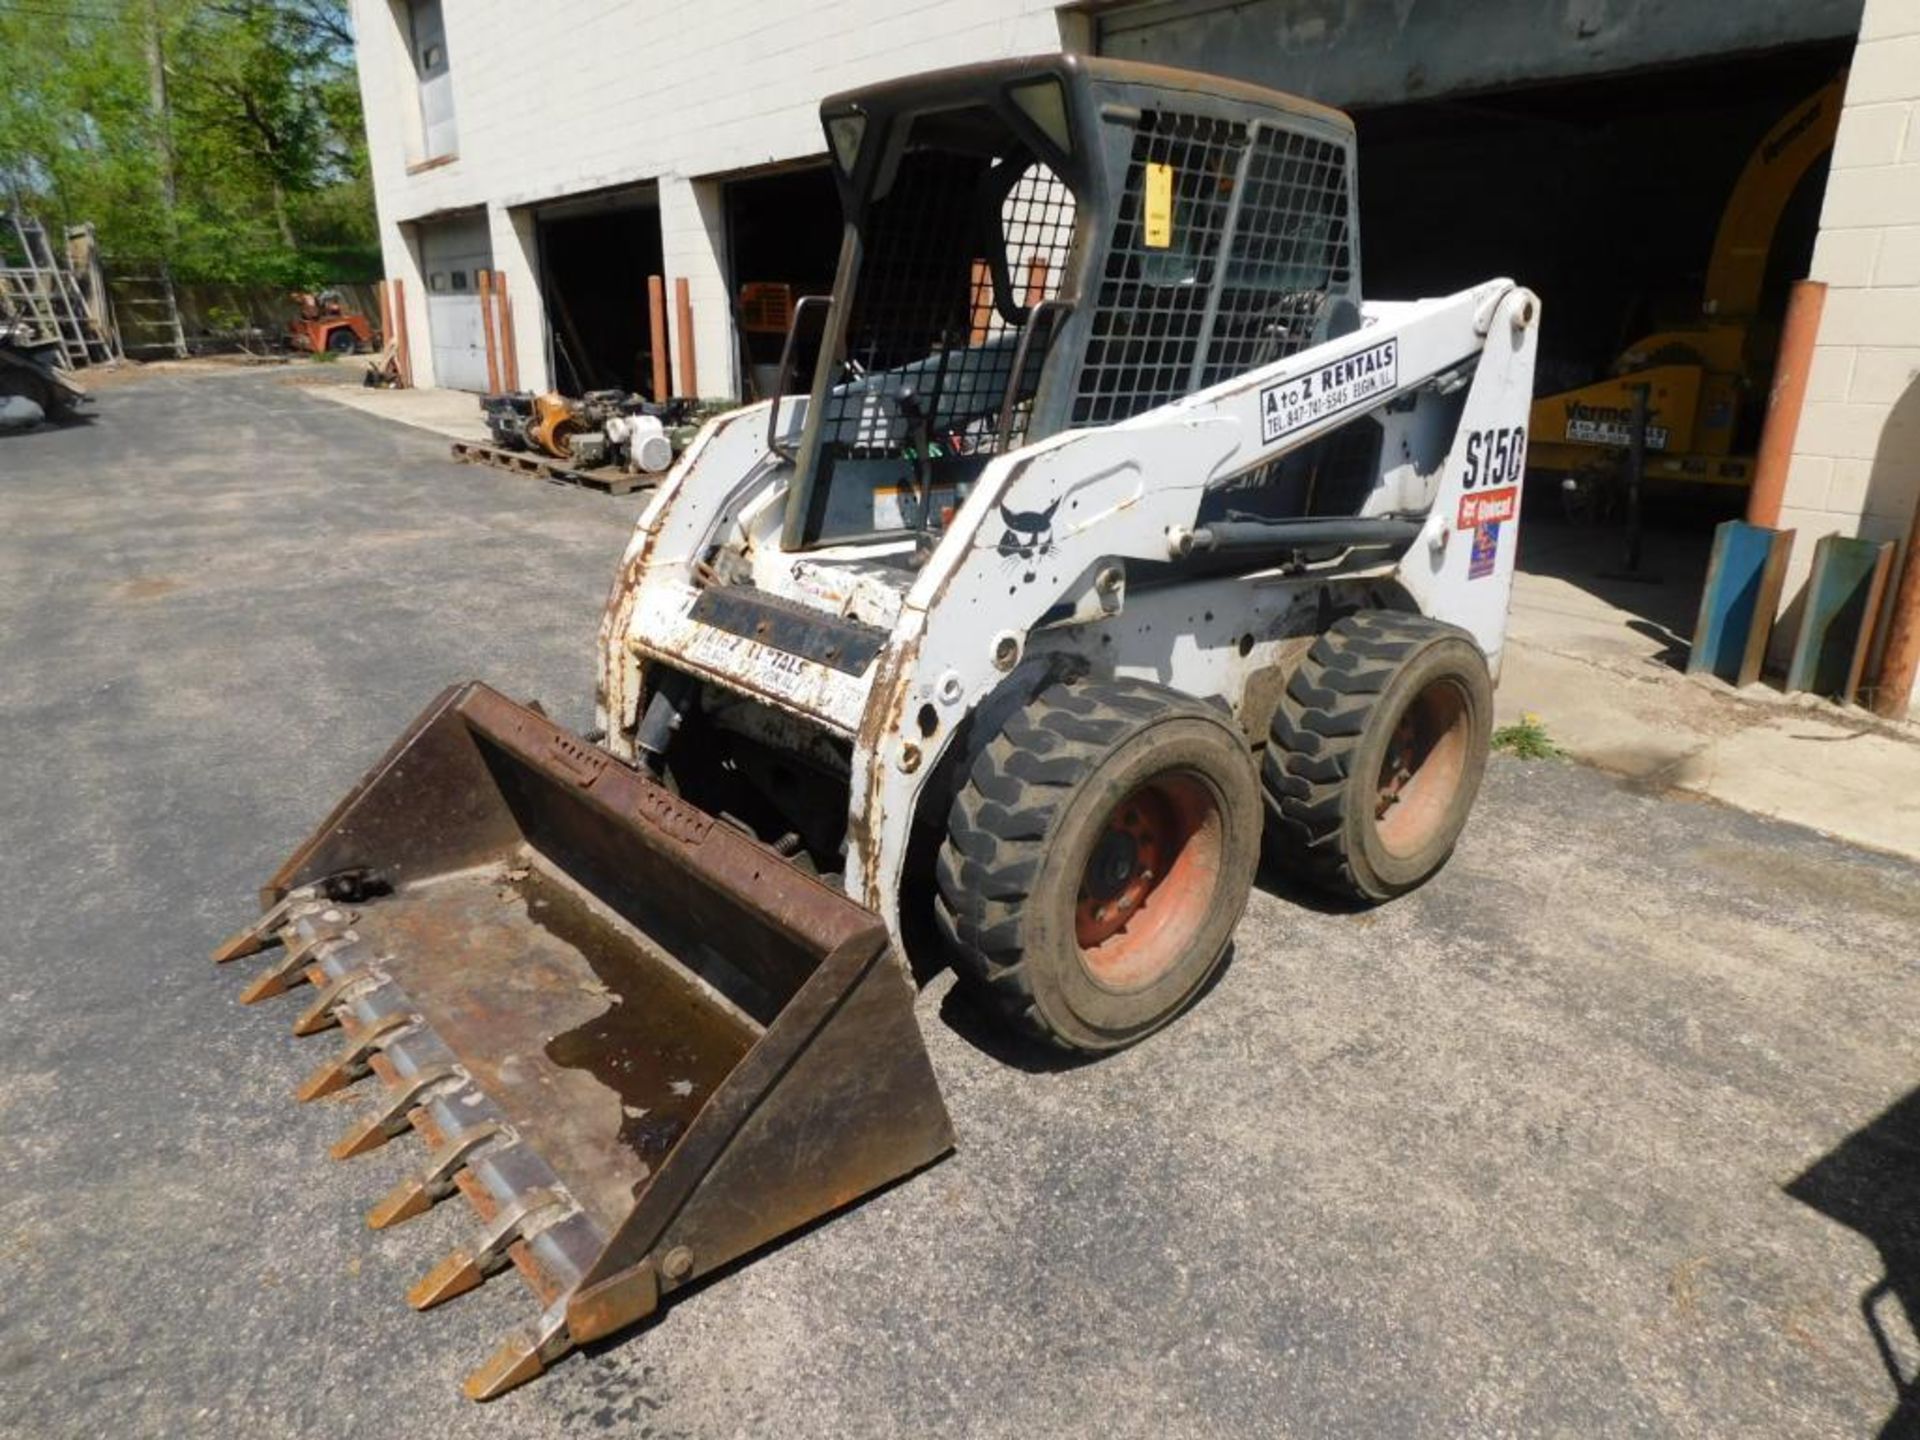 2007 Bobcat S150 Skid Steer Loader, 67" Removable Tooth Bucket, Rubber Tire, Diesel, 2677 Hours Indi